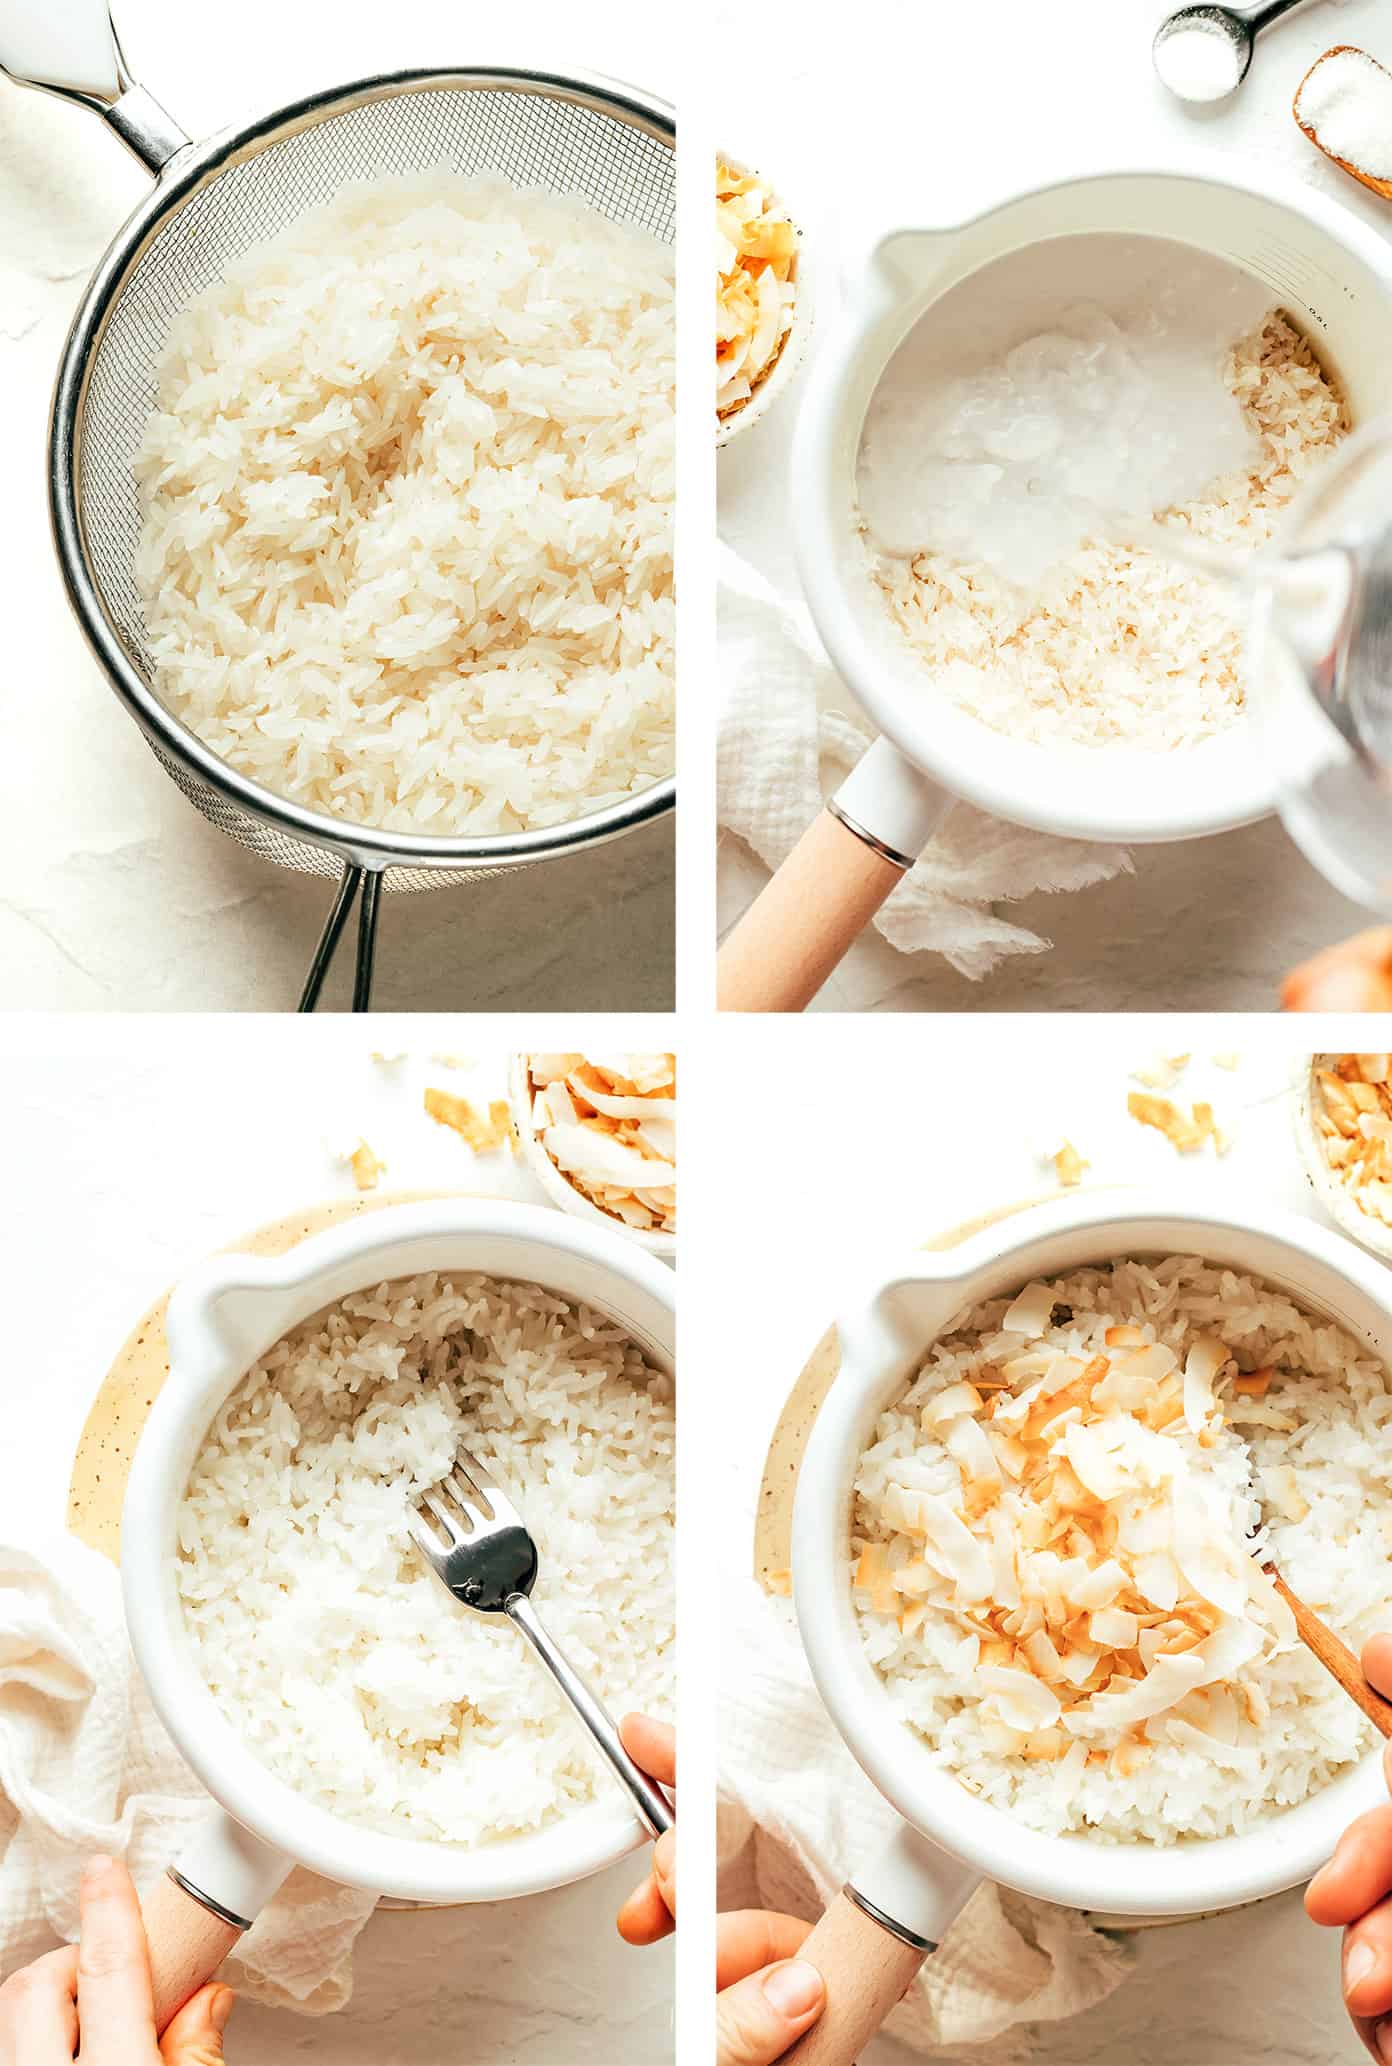 Step by step photos showing how to make coconut rice